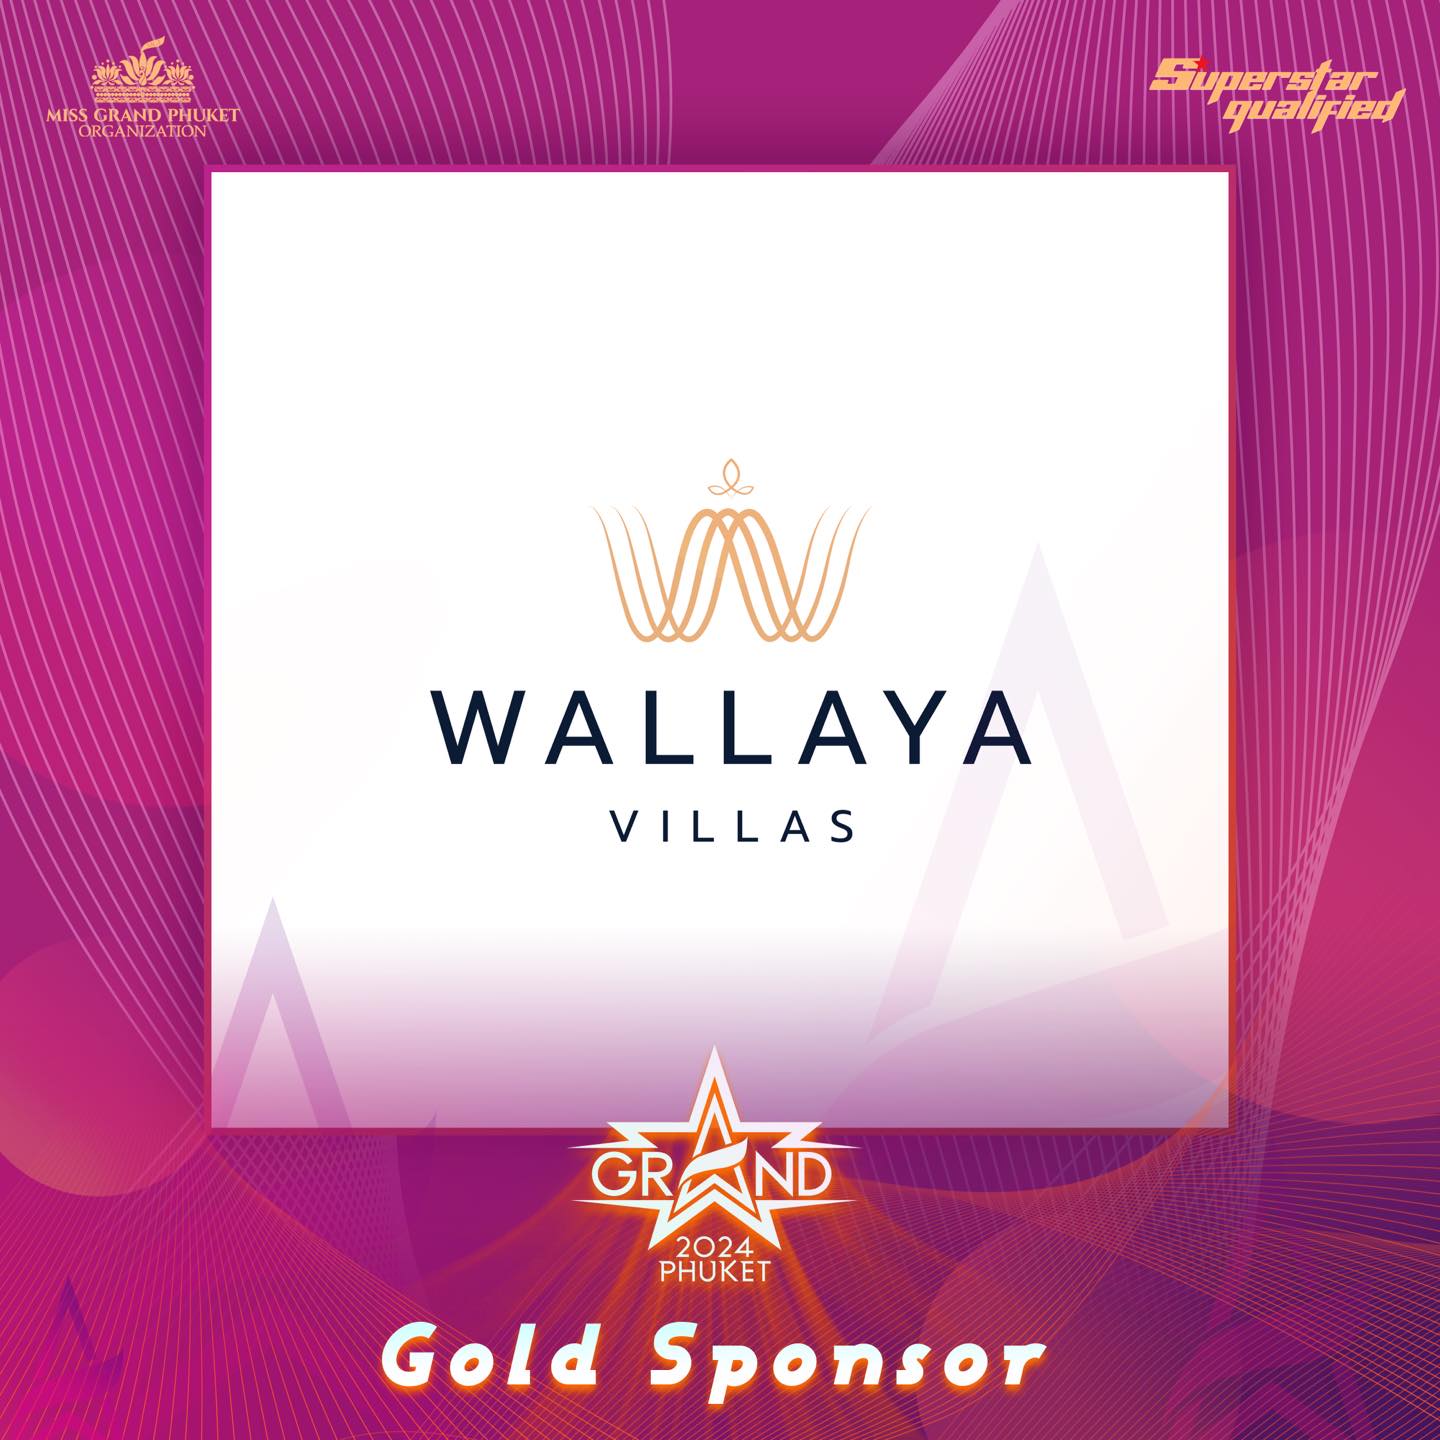 Discover the Gold Sponsor for Miss Grand Phuket 2024 by Wallaya Villas